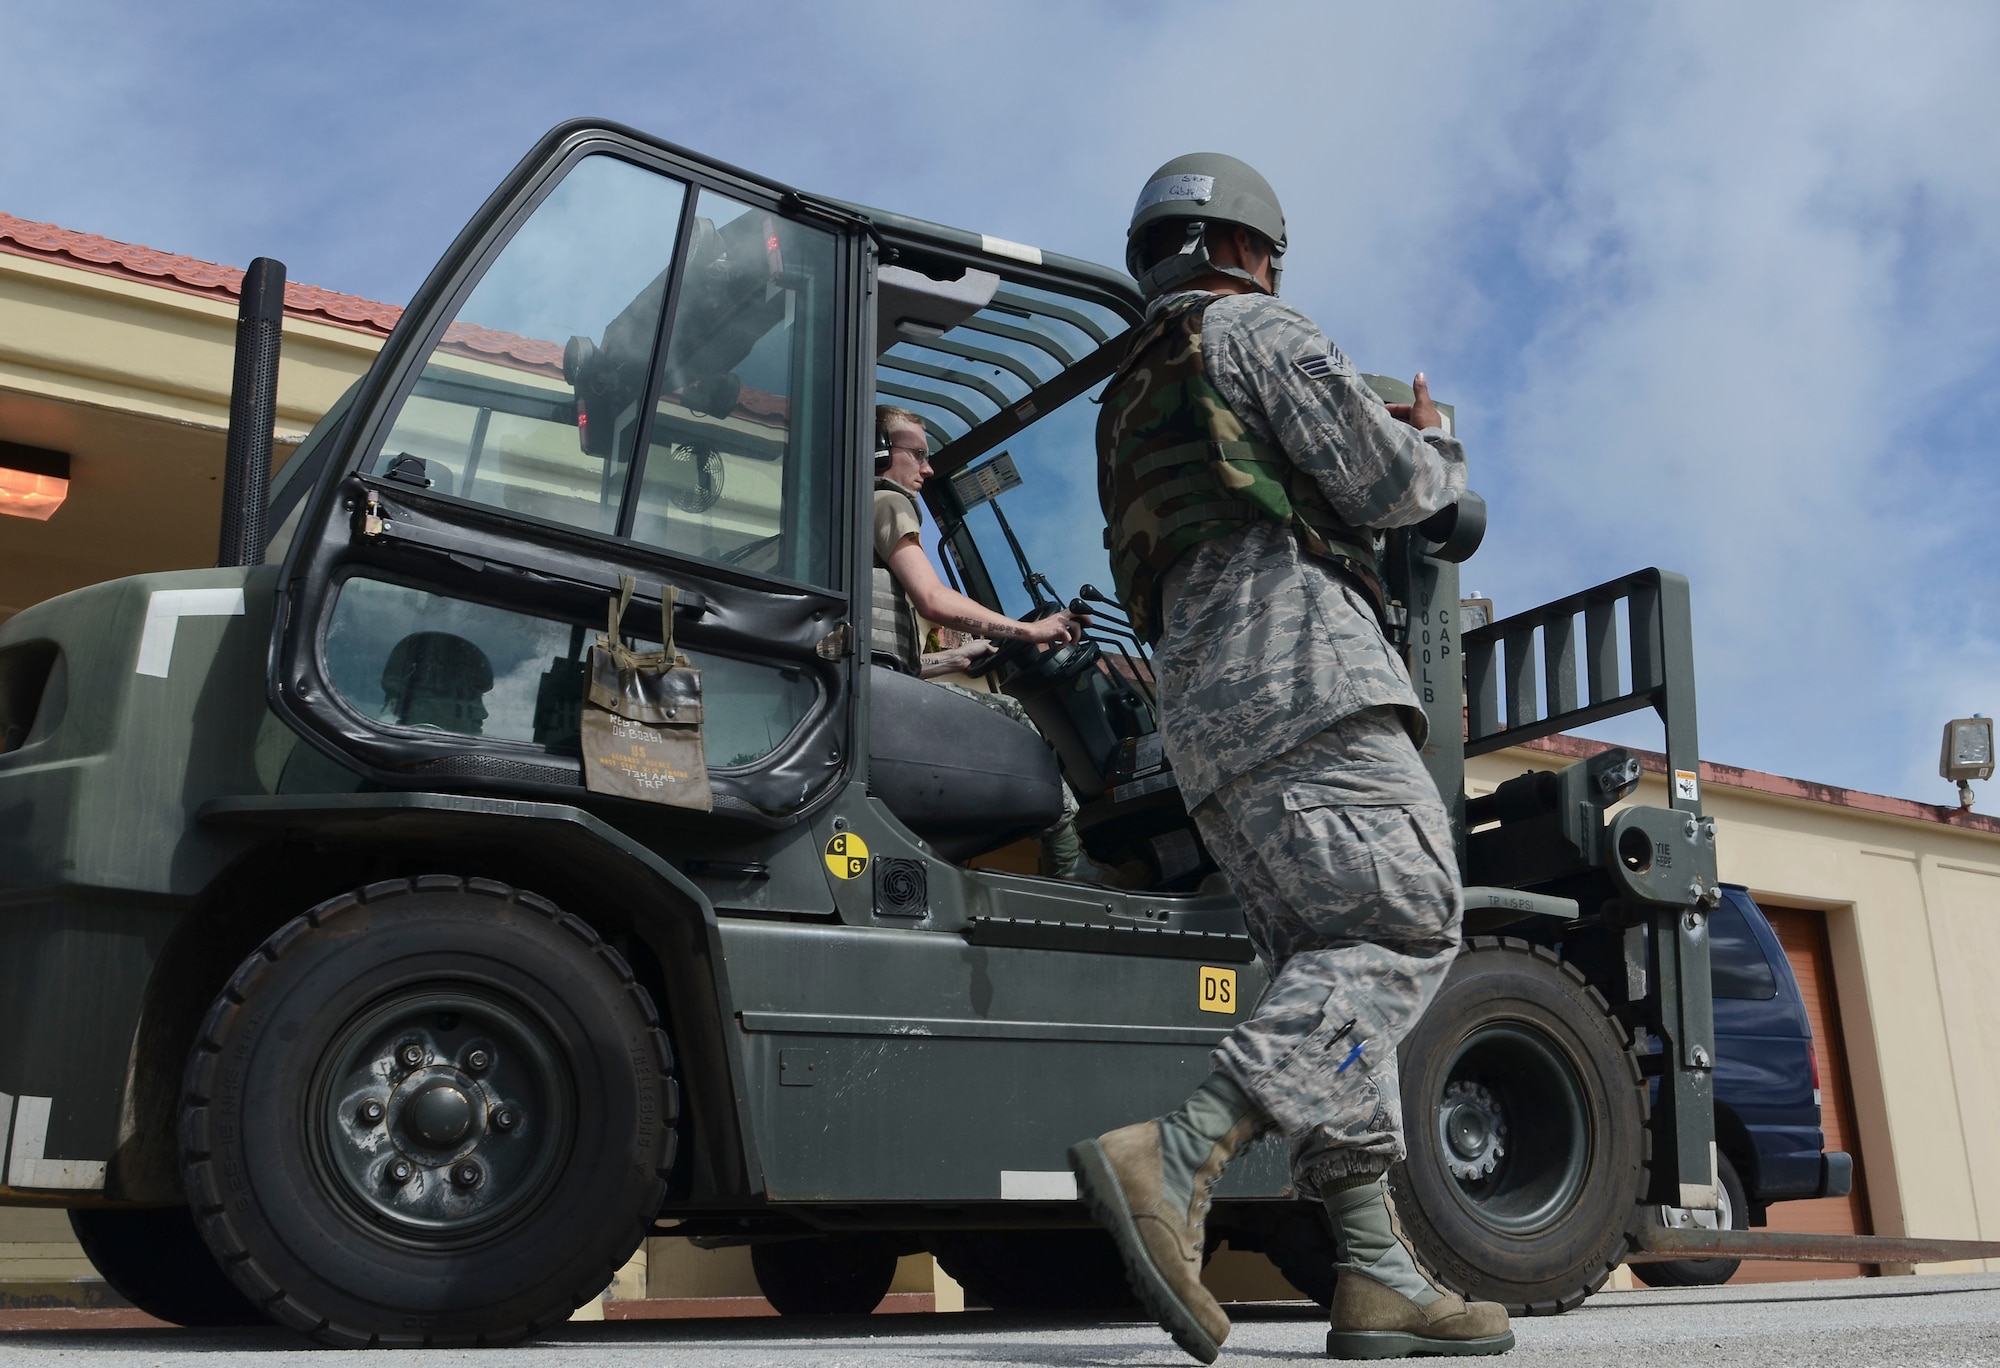 734th Air Mobility Squadron passenger service agents Senior Airman Tomas Cubilla and Airman 1st Class Adam McAteer operate a forklift April 16, 2014 during an operational readiness exercise on Andersen Air Force Base, Guam. The 36th Wing exercises regularly to ensure Airmen and the base populace are trained and ready to respond quickly and accurately in the event of a crisis. (U.S. Air Force photo by Airman 1st Class Emily A. Bradley/Released)